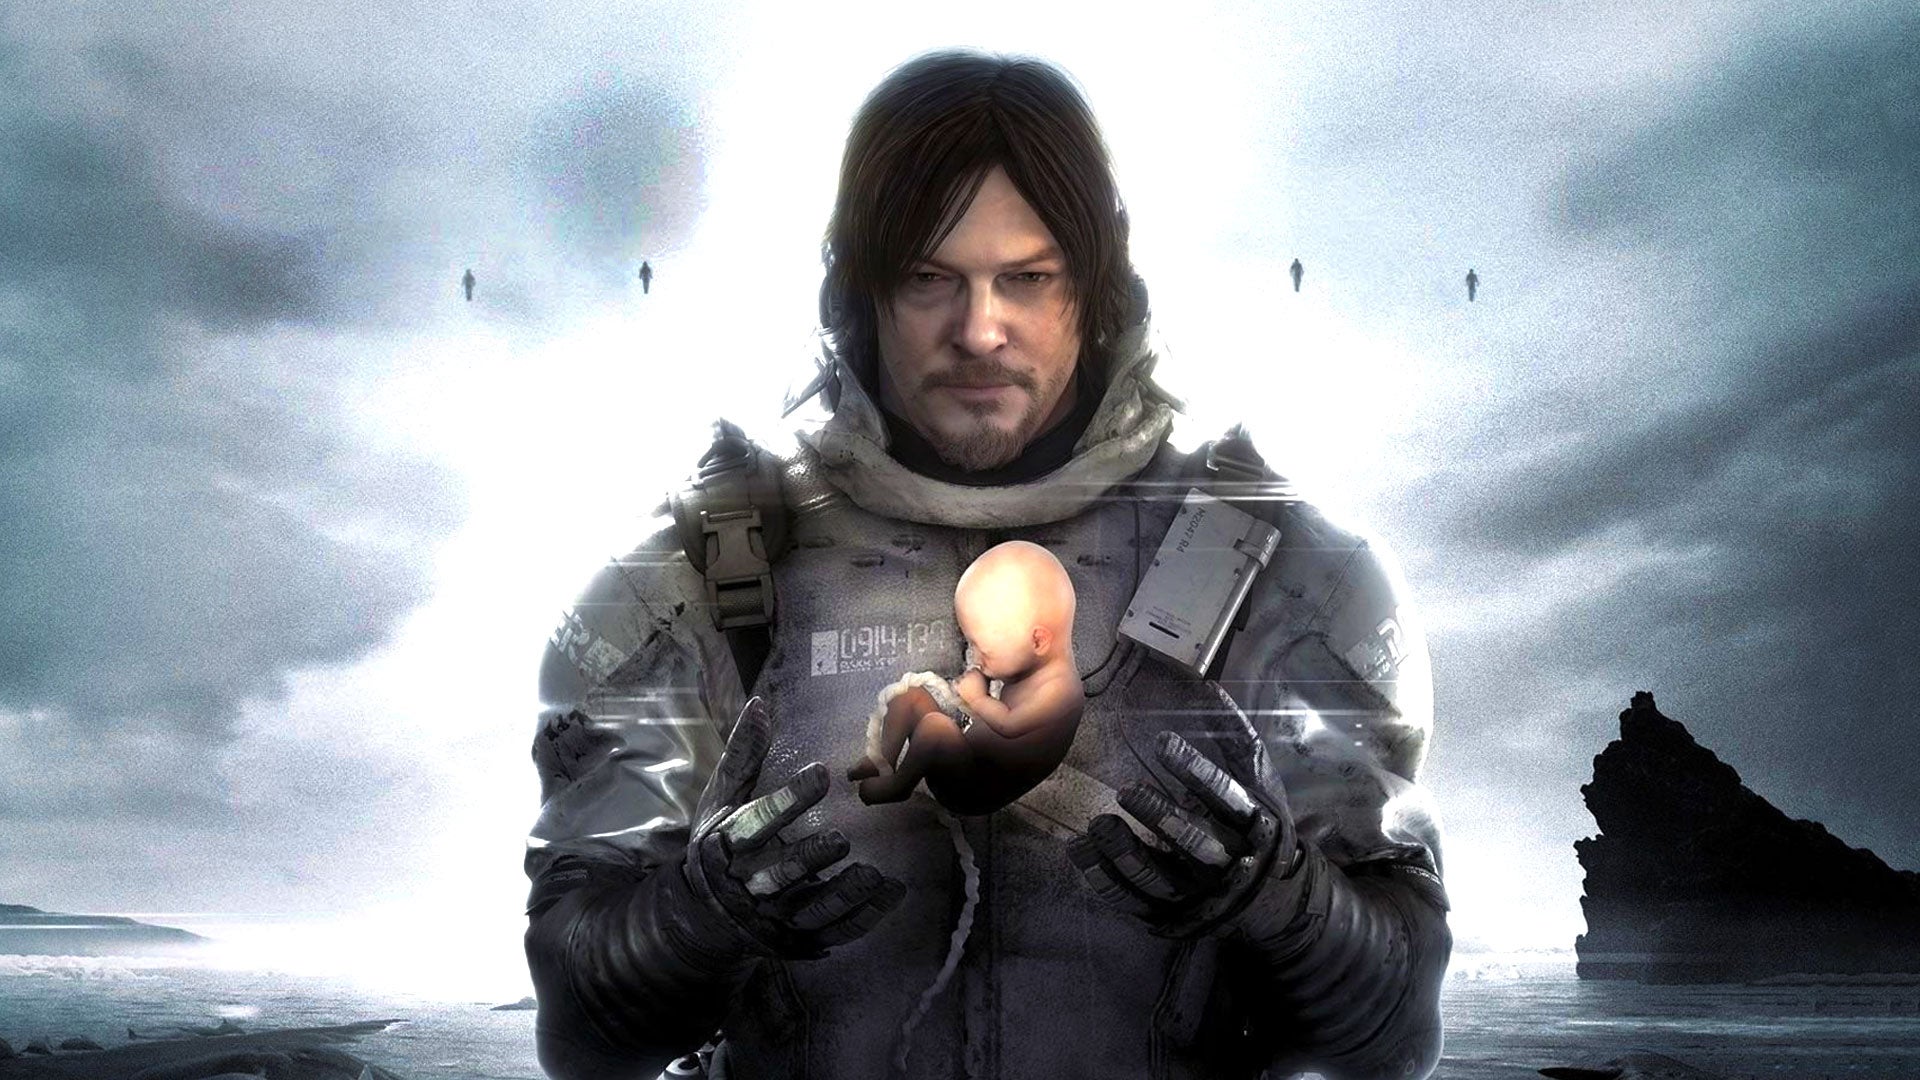 Death Stranding joins Xbox Game Pass for PC.